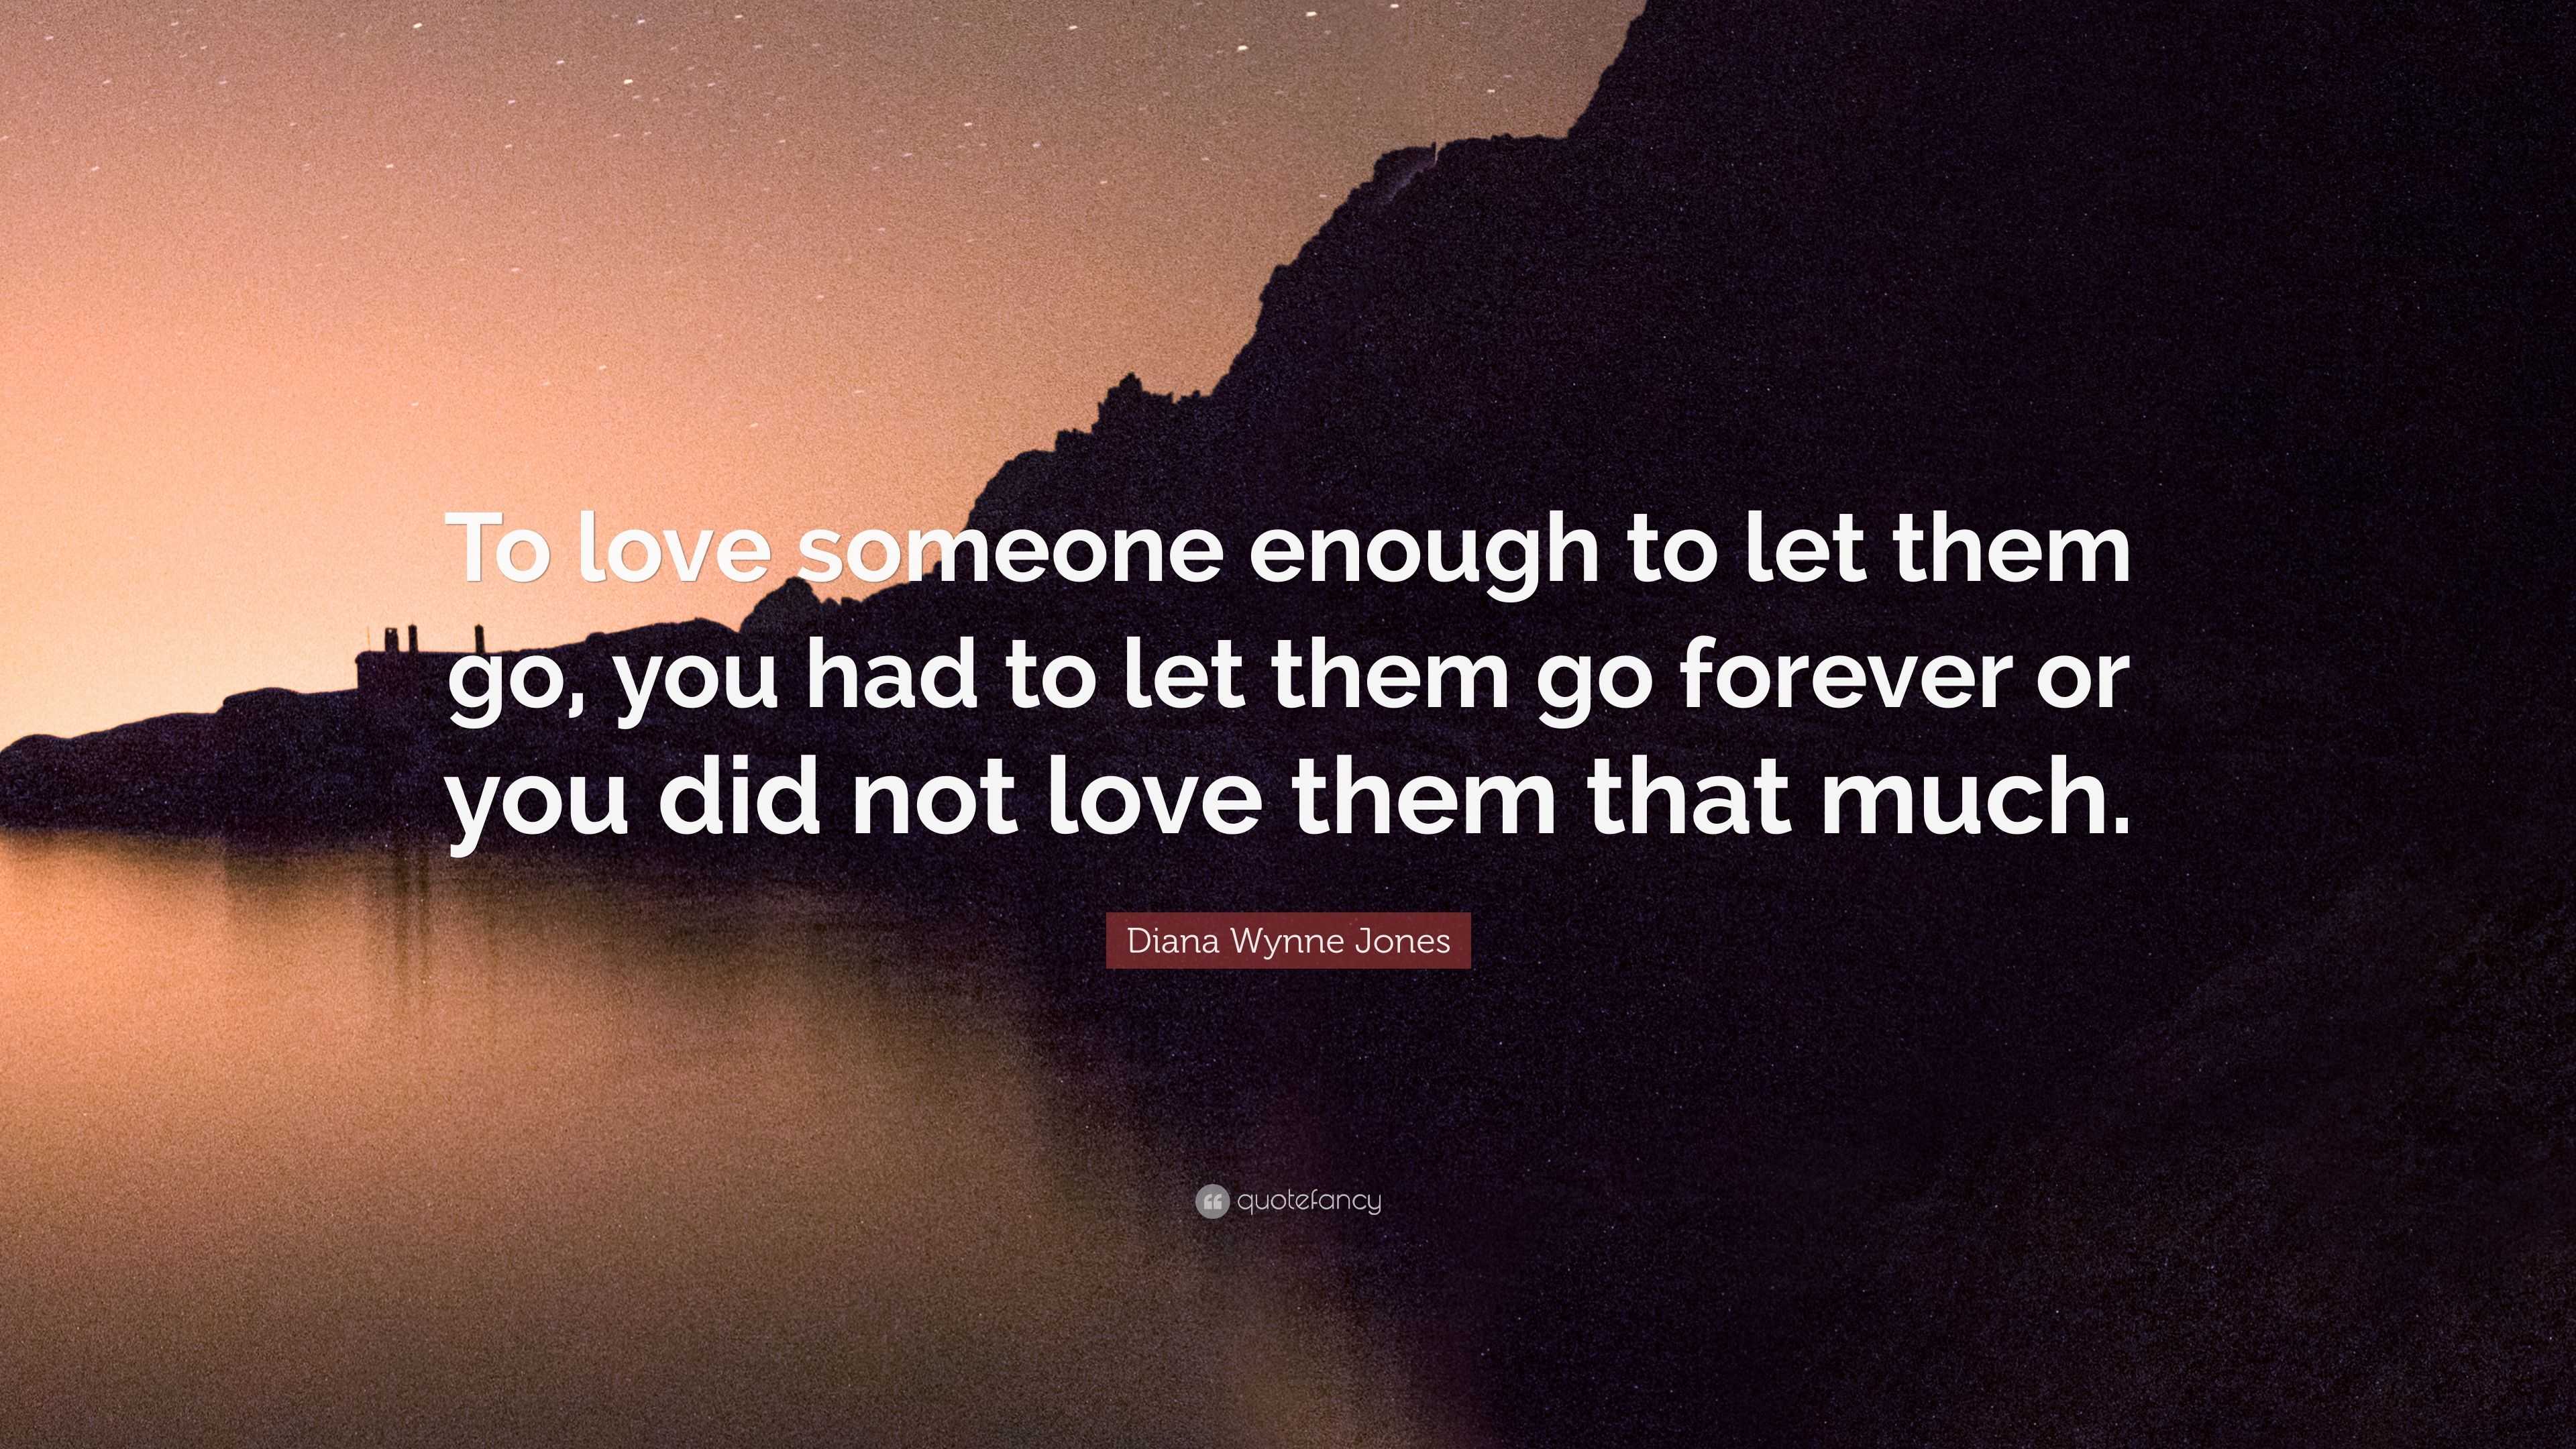 Love Someone Enough To Let Them Go Why The Cliché Quote If You Love Someone Let Them Go 